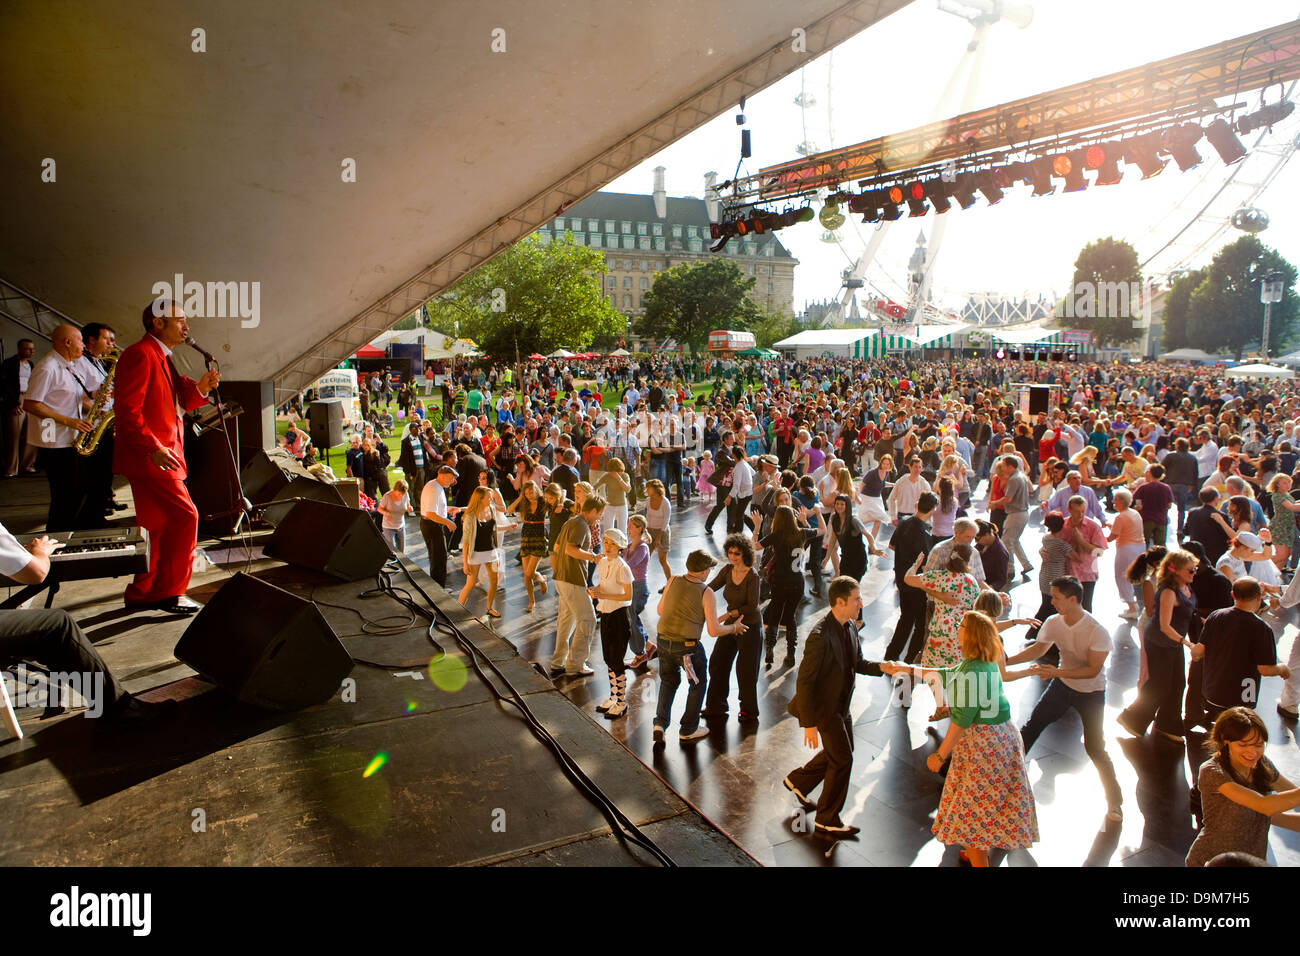 People dancing at the Southbank Festival, London, UK Stock Photo